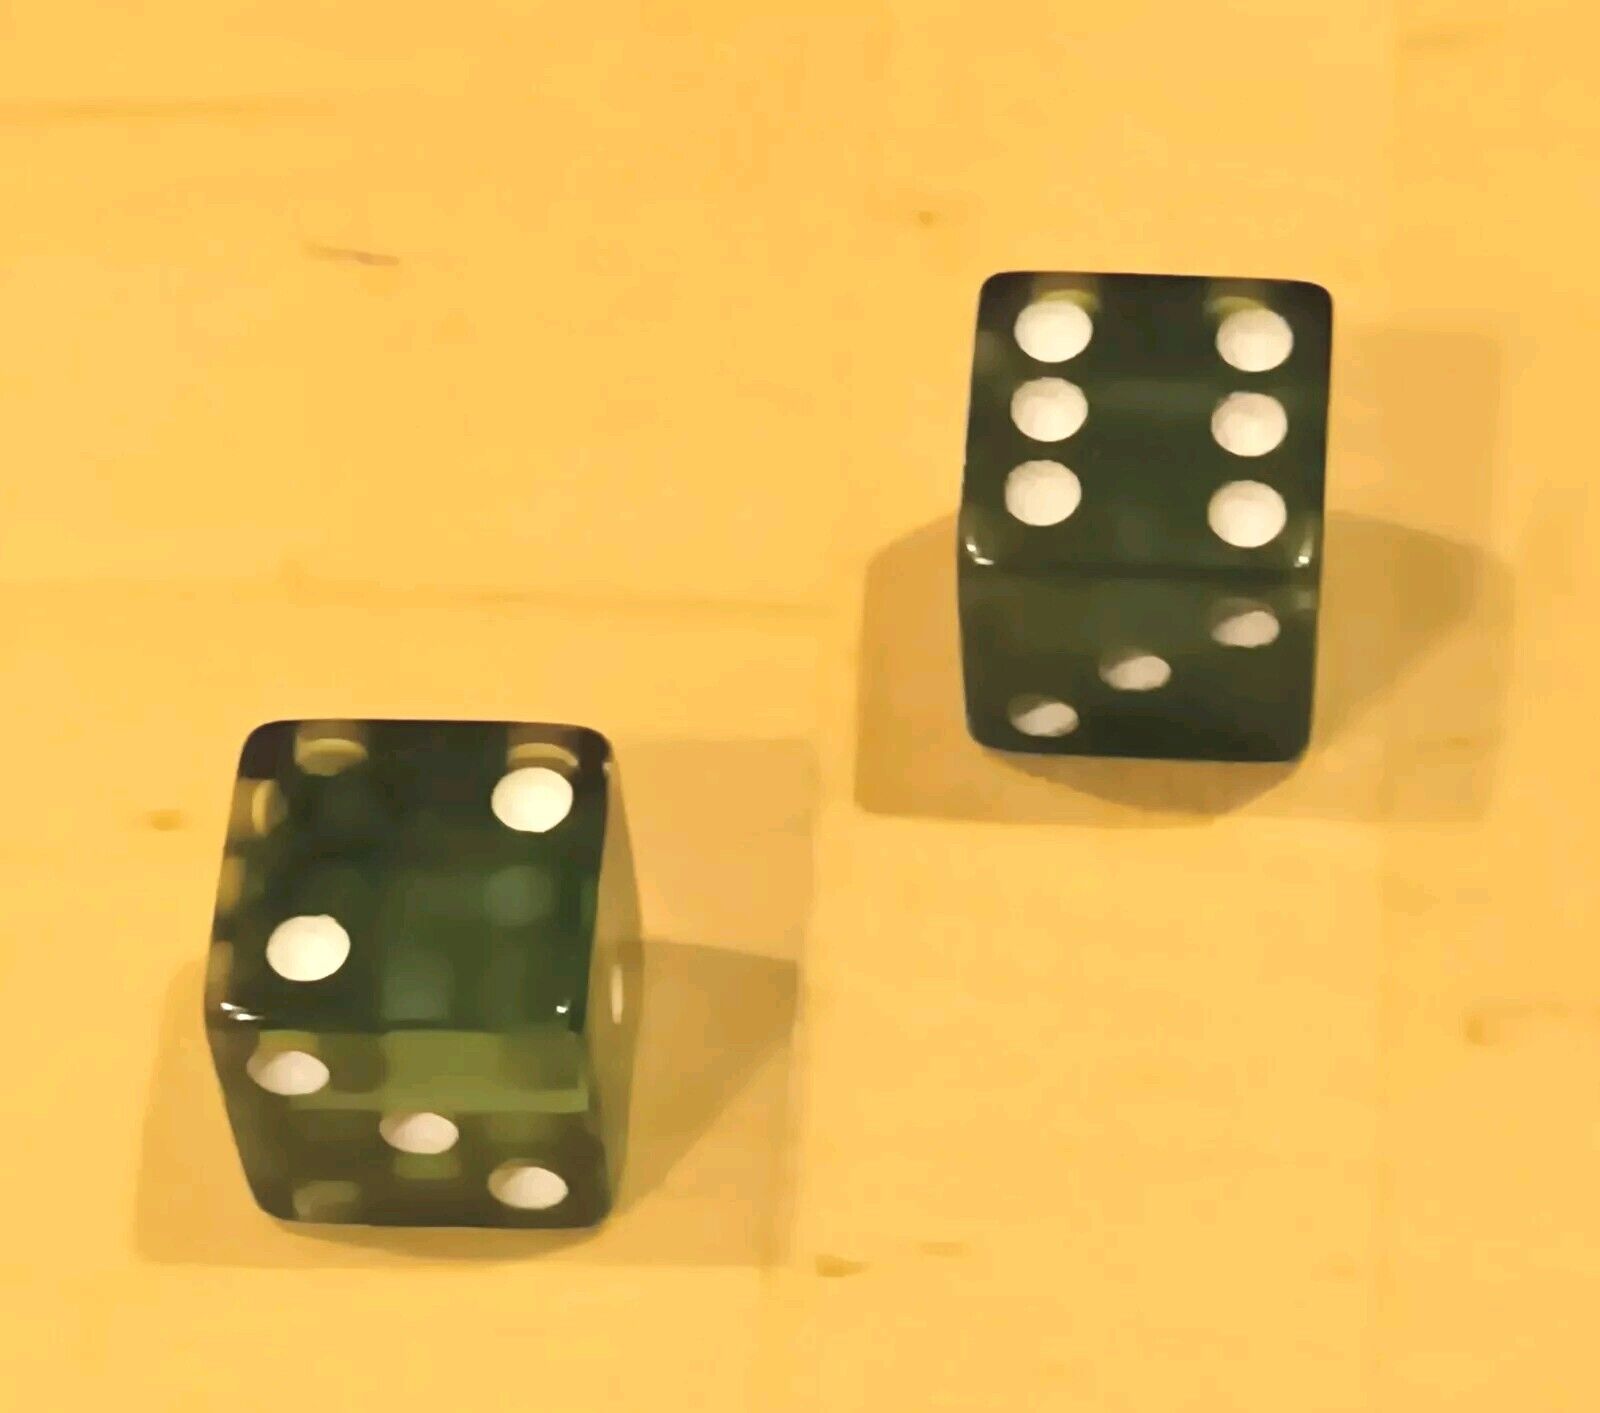 Vintage Translucent Green Bakelite 14mm 9/16in Square Dice With White Pips